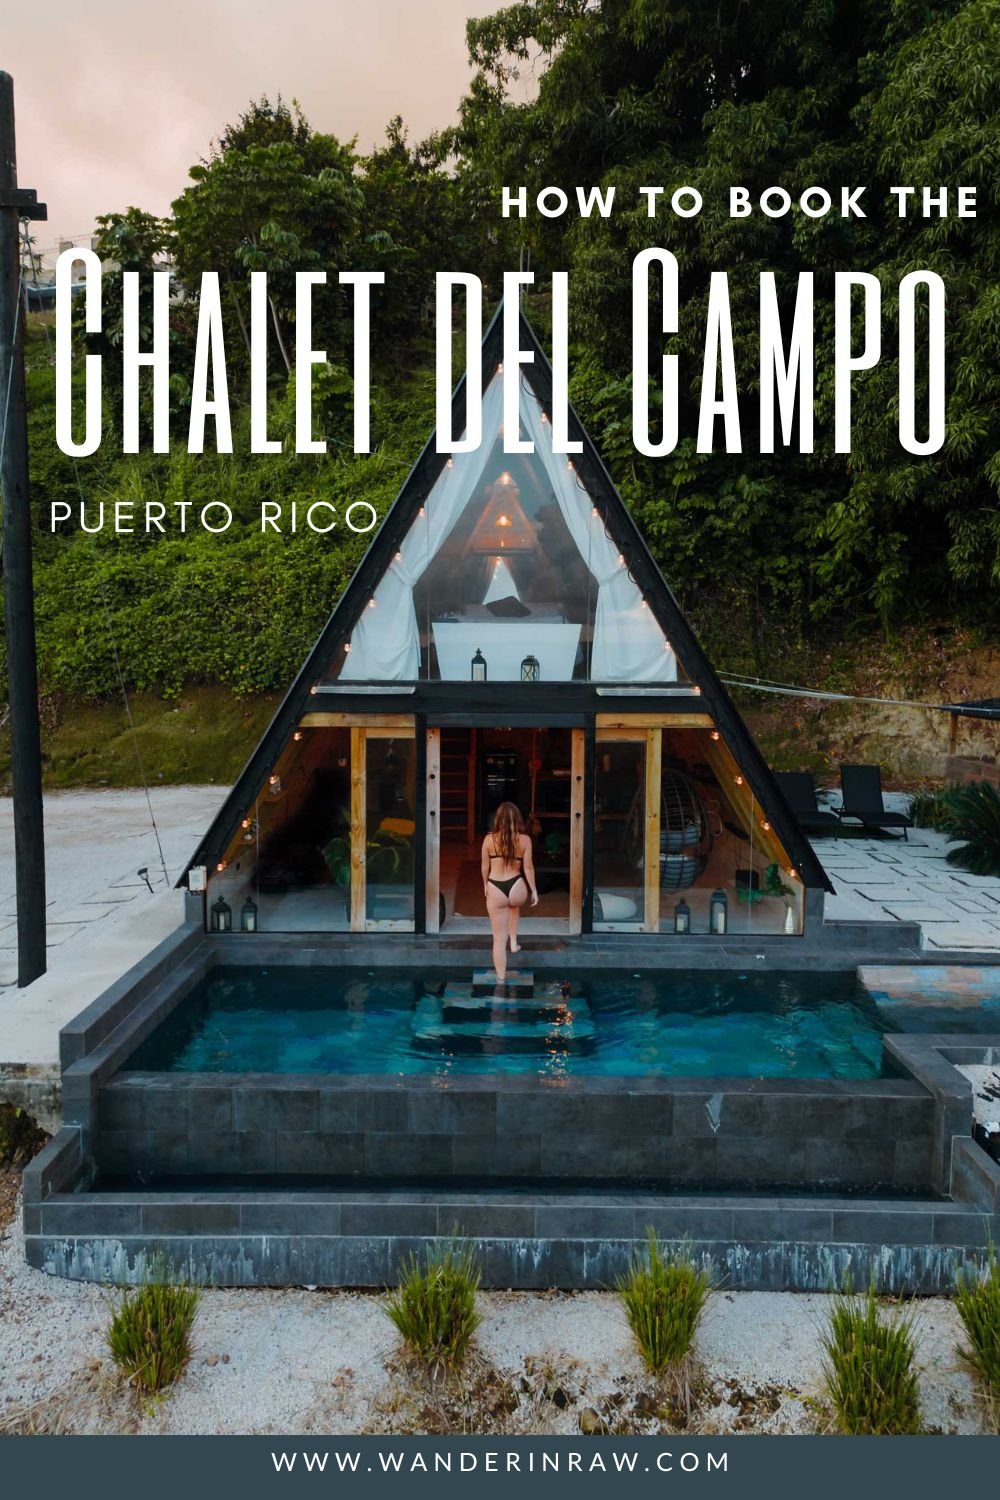 Chalet del Campo: The Best Airbnb in Puerto Rico